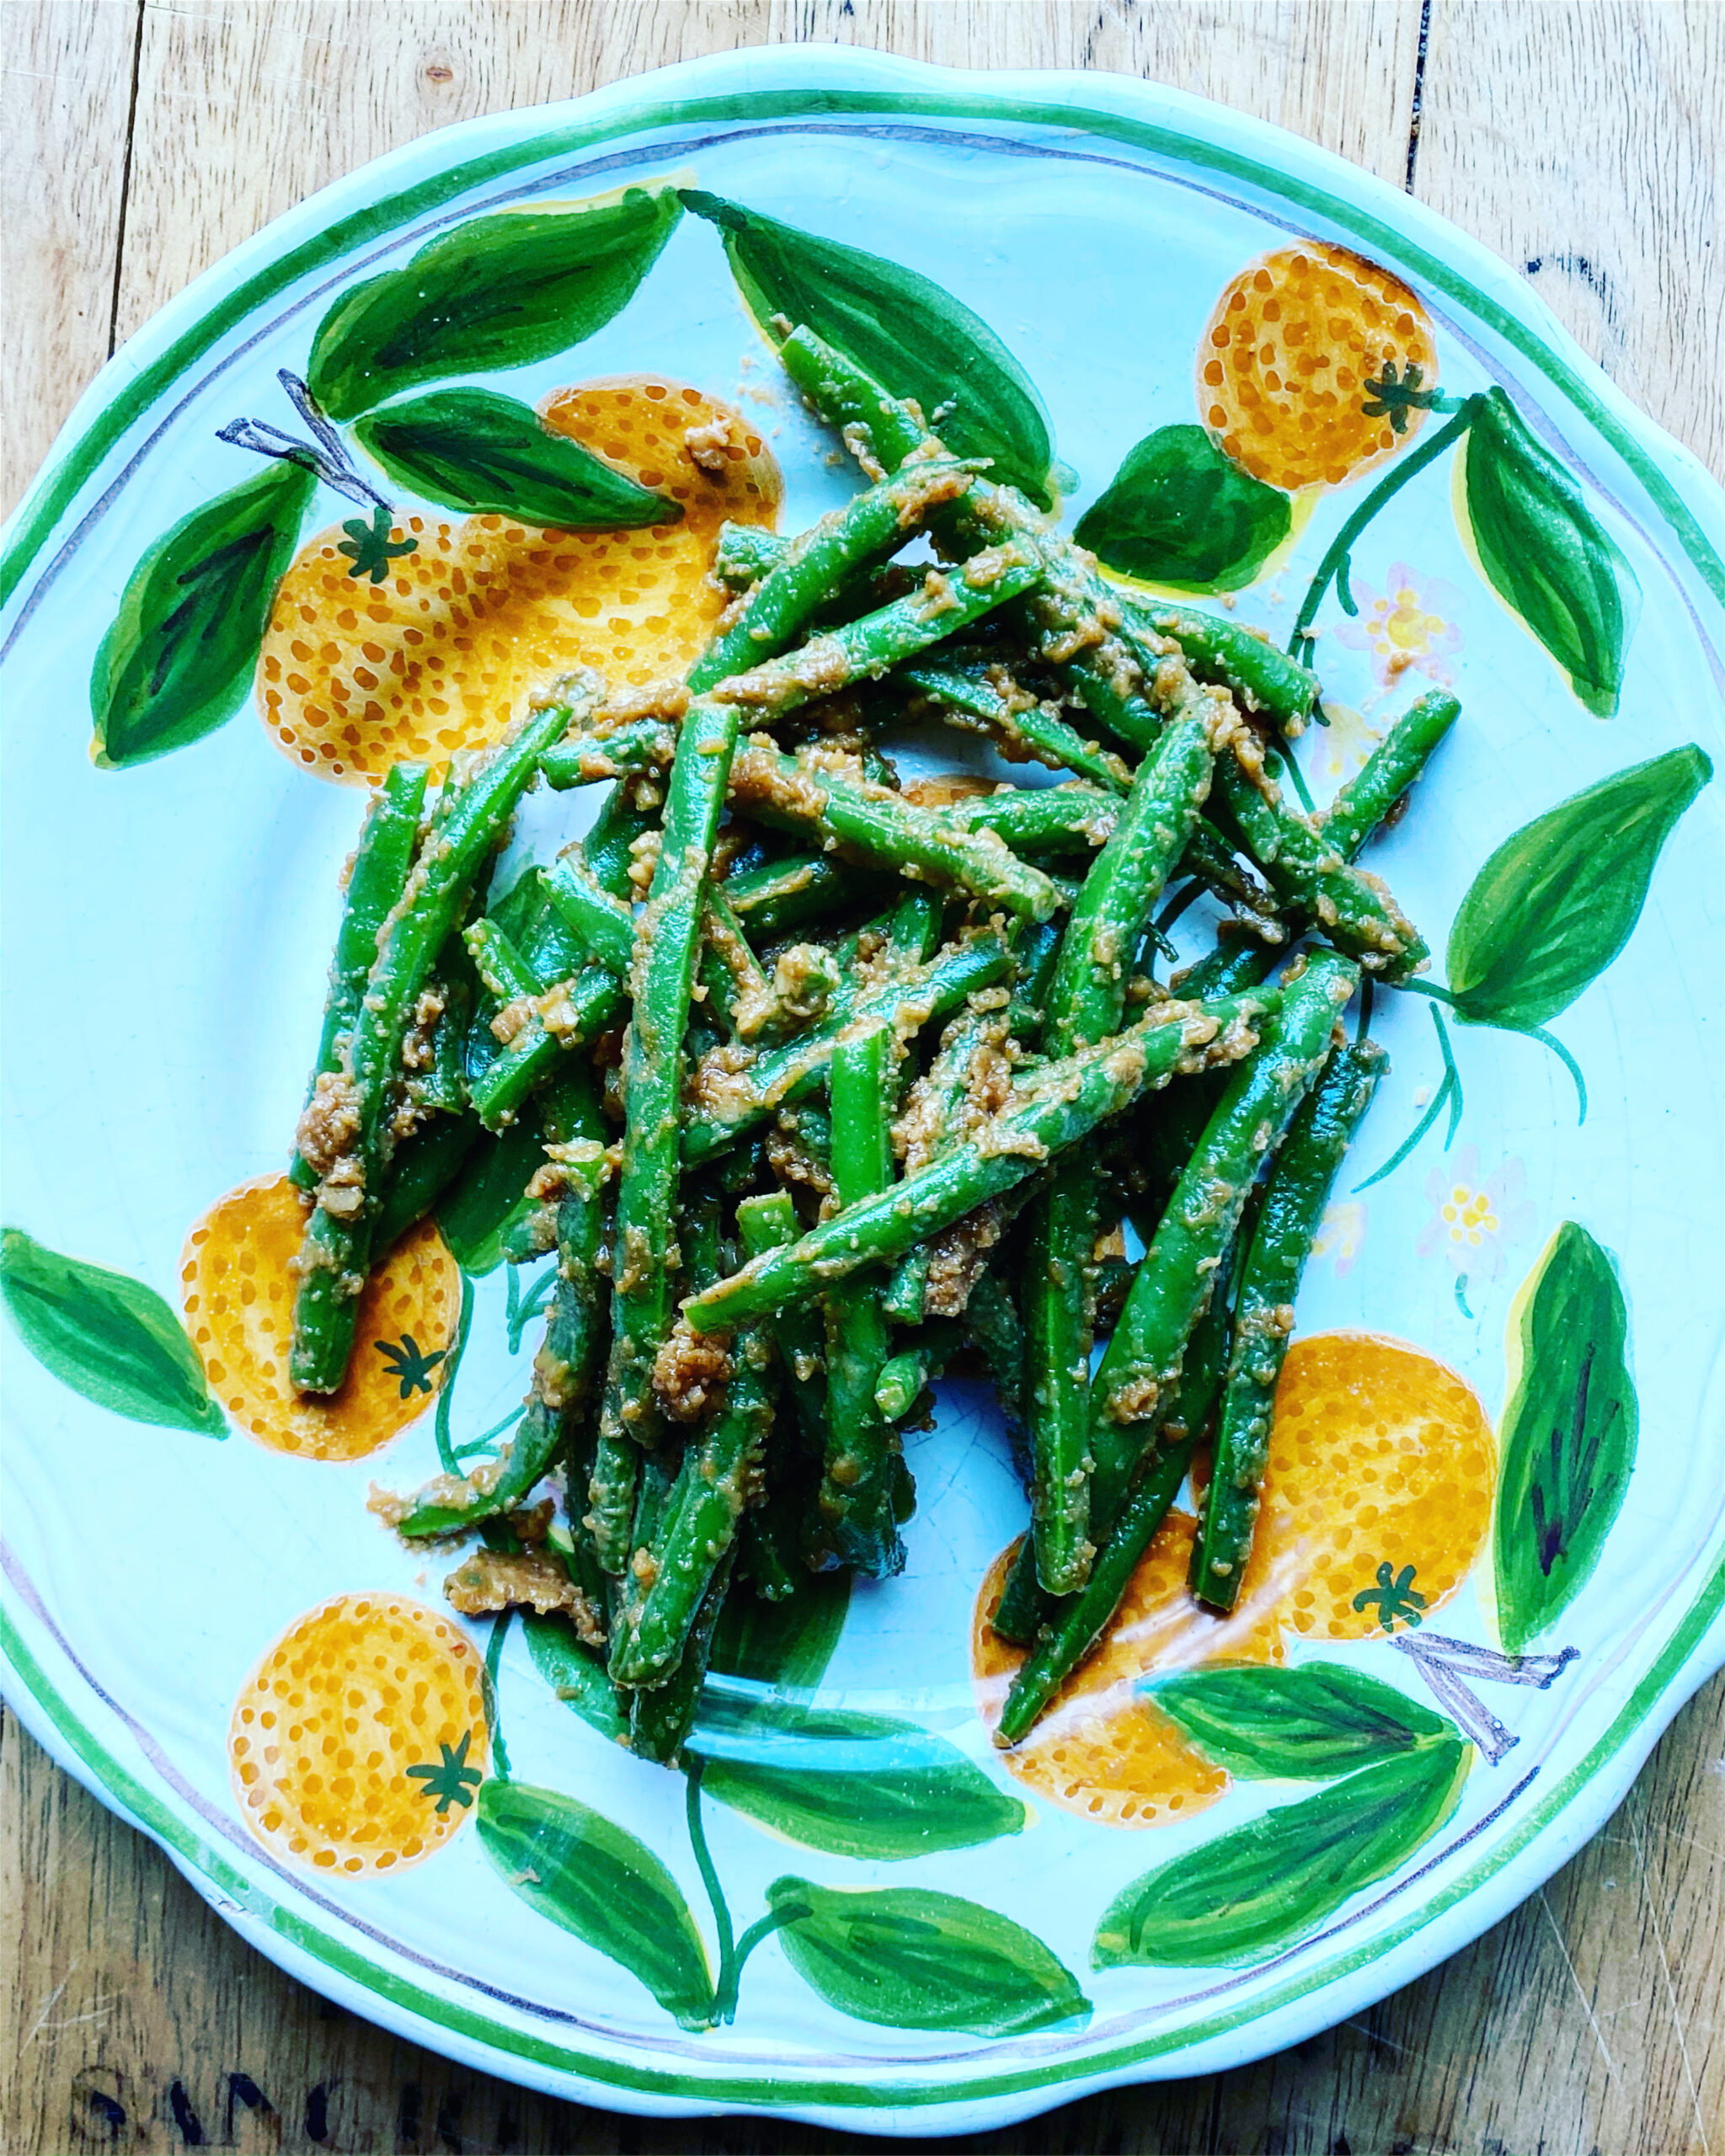 Featured image for “Amma’s Tahini Green Beans”